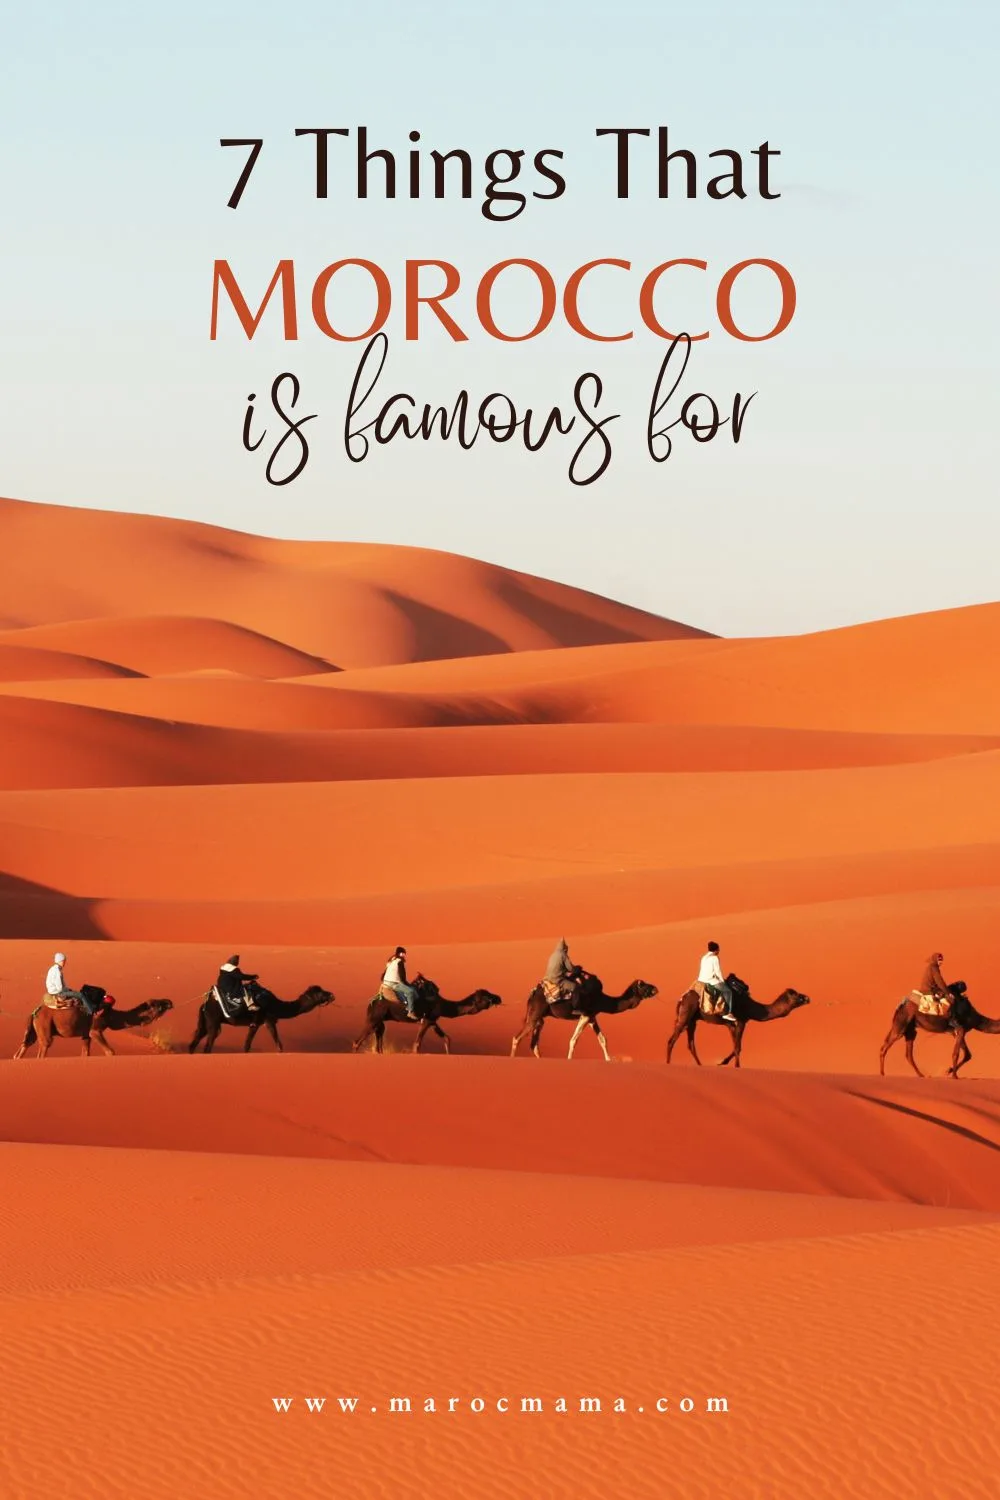 A caravan in the Sahara Dessert with the text 7 Things That Morocco is Famous For